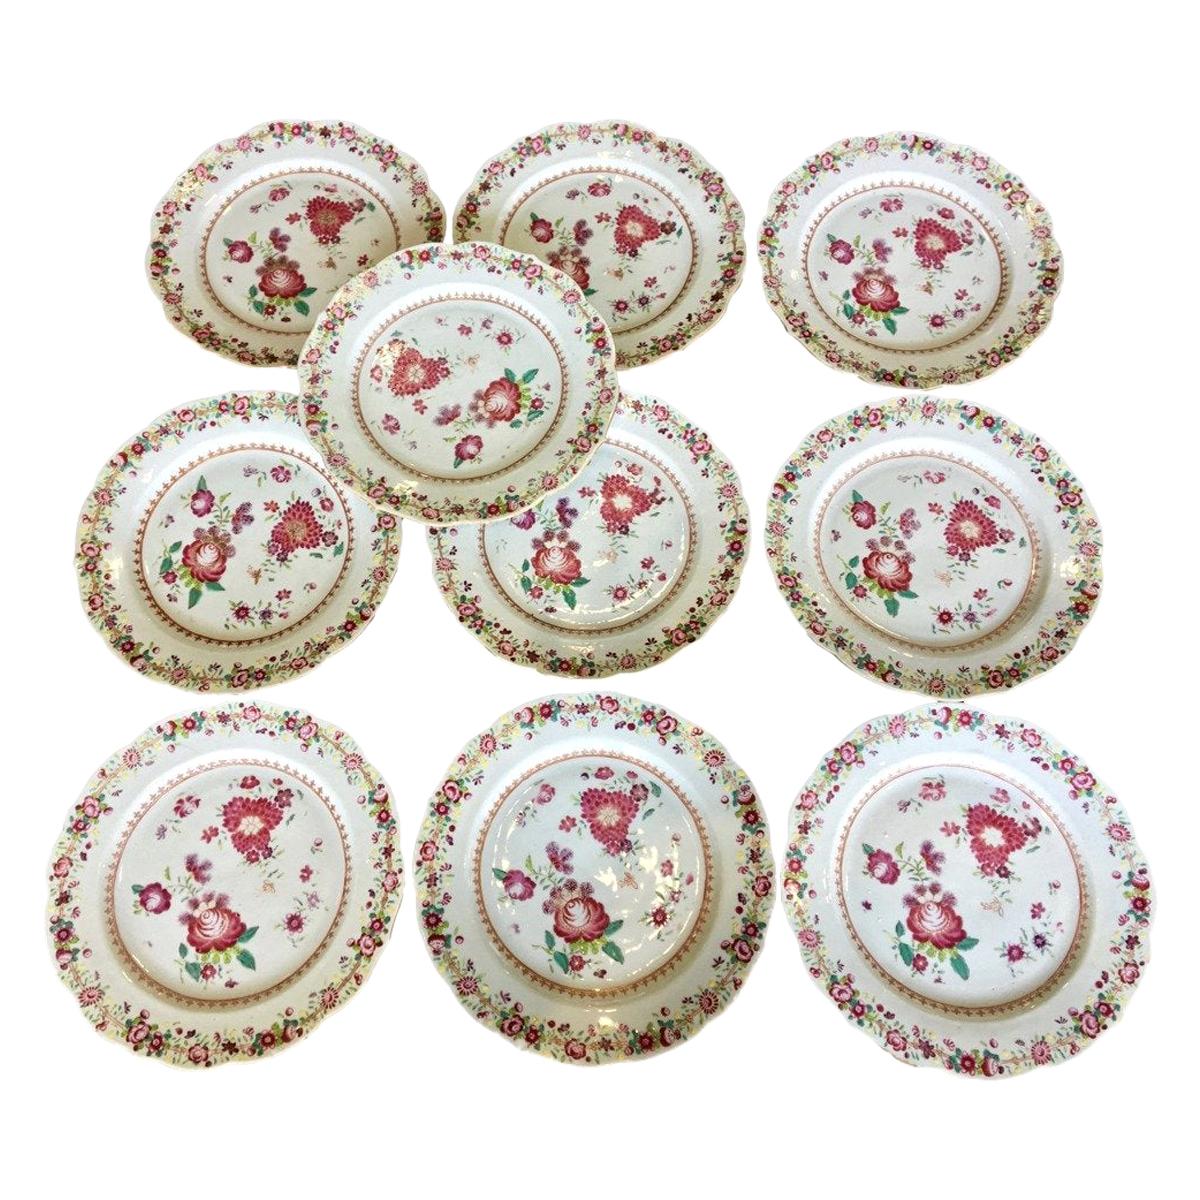 Set of Ten Famille Rose Chinese Export Plates, circa 1760